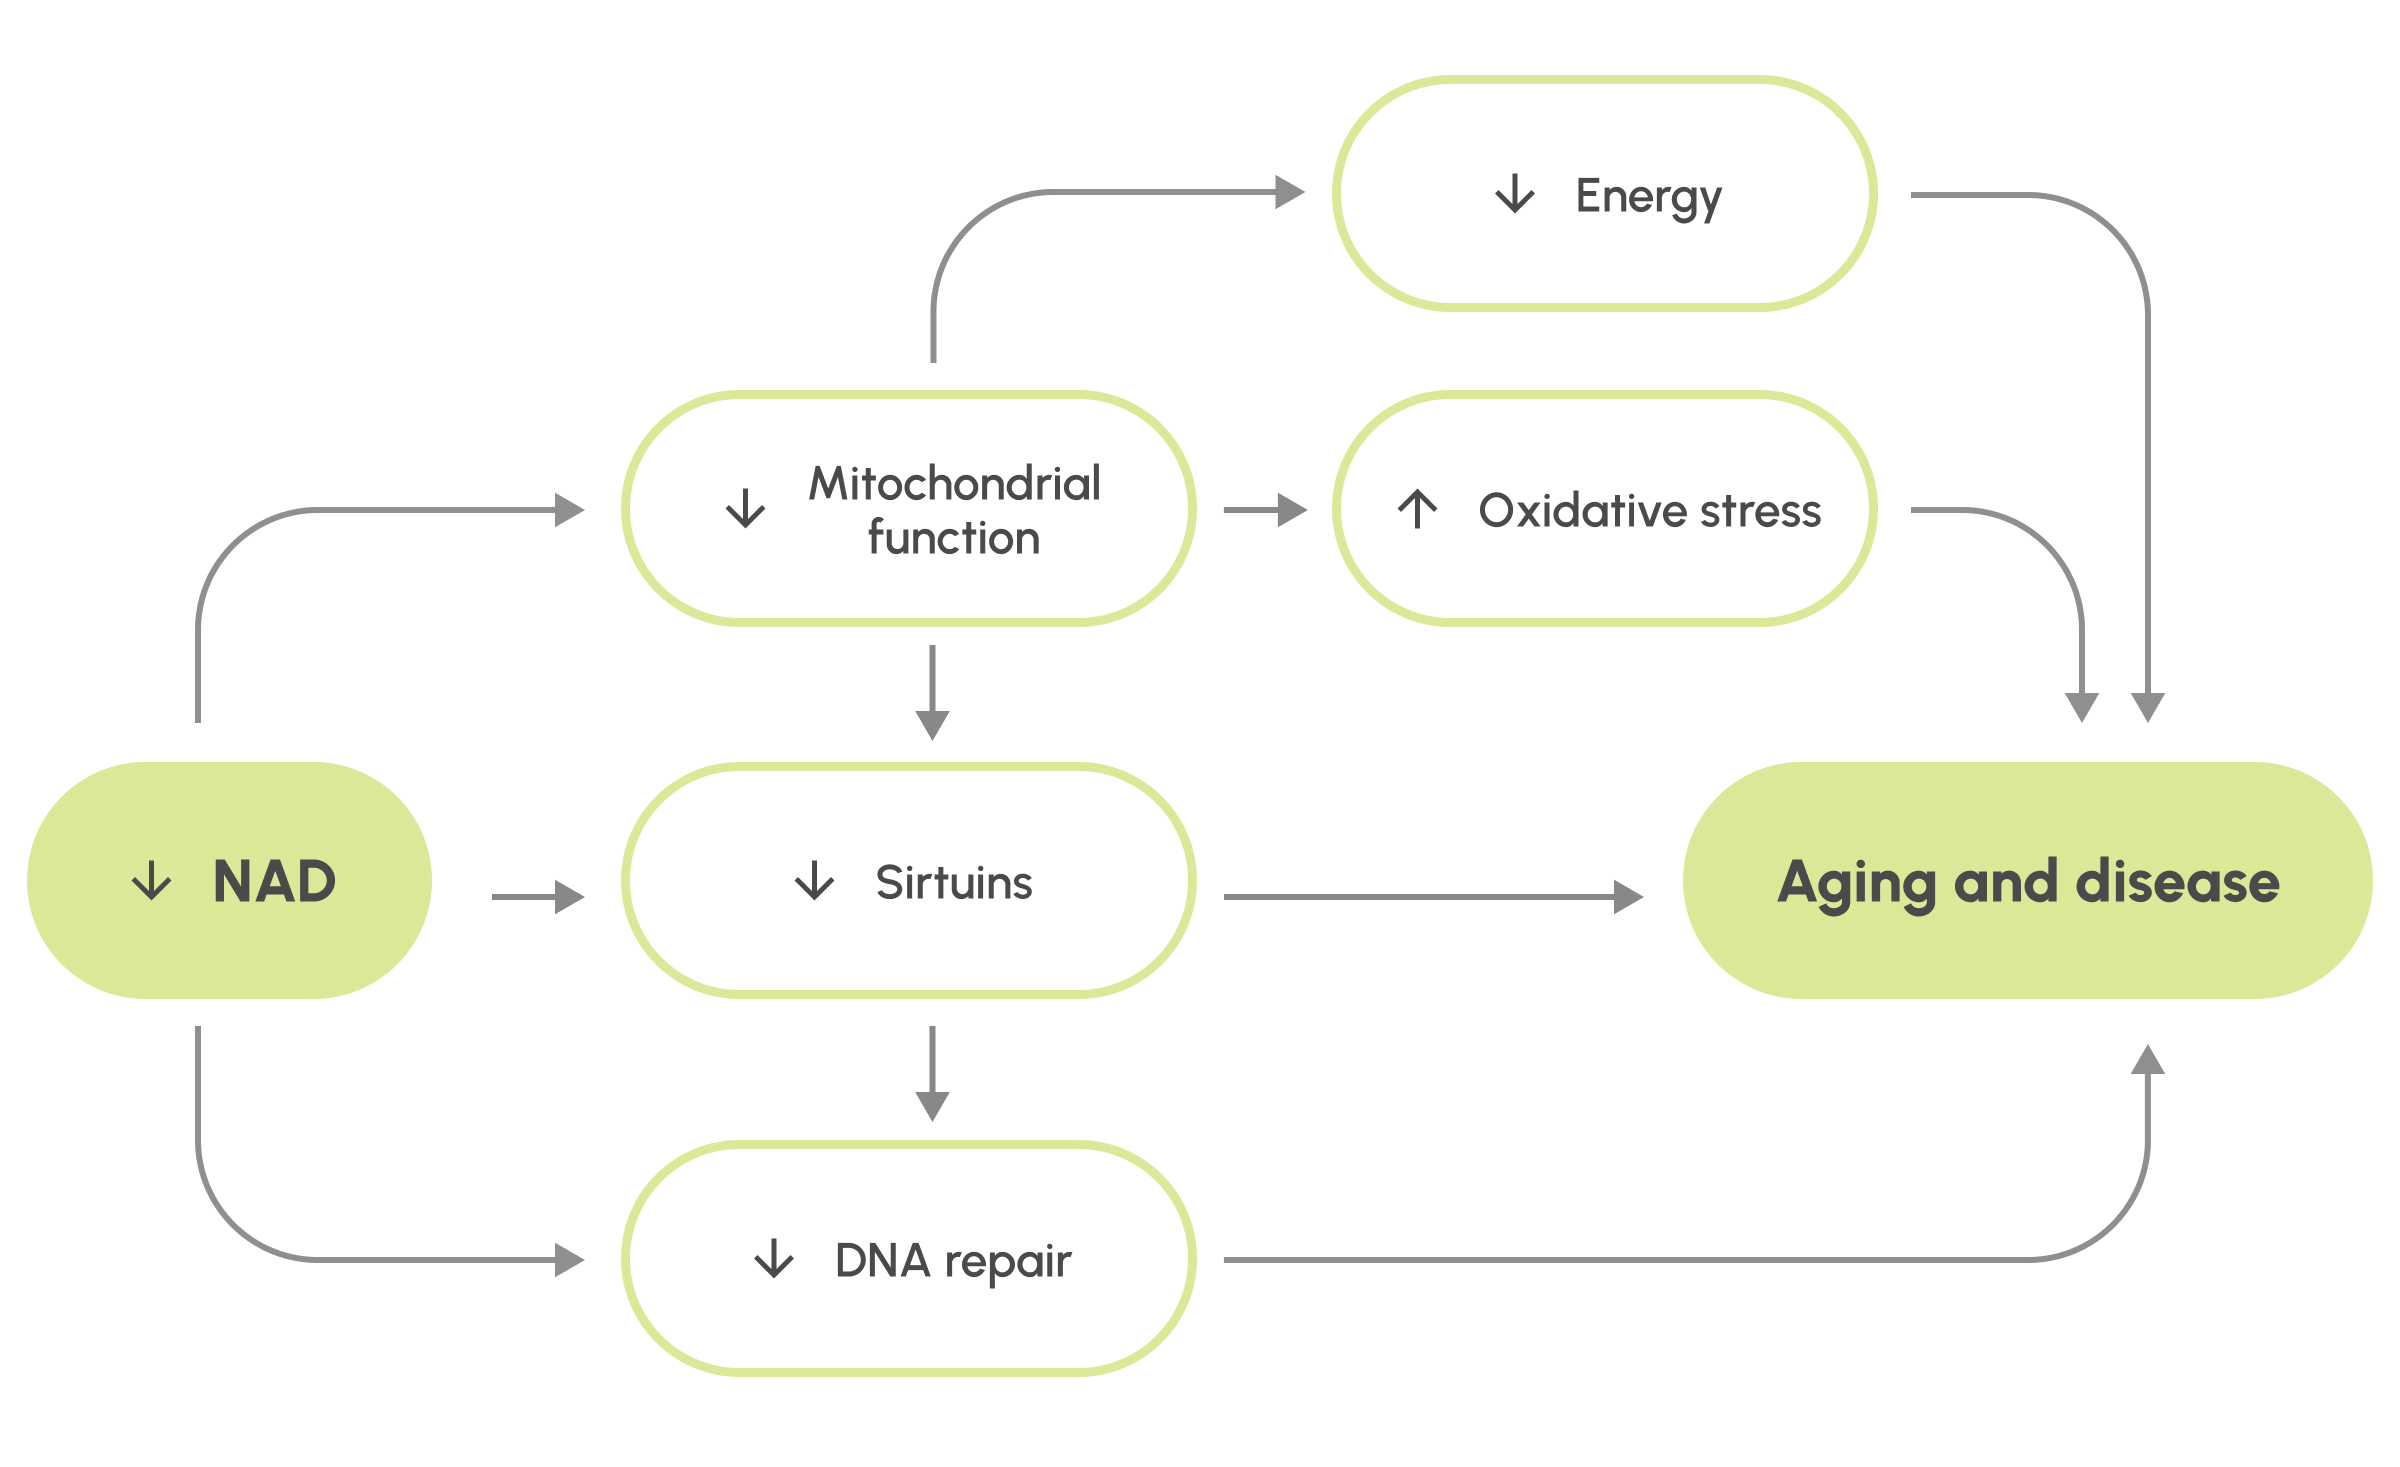 The drop of NAD leads to decrease in mitochondrial function, sirtuin activity and DNA repair, ultimately leading to aging and disease.